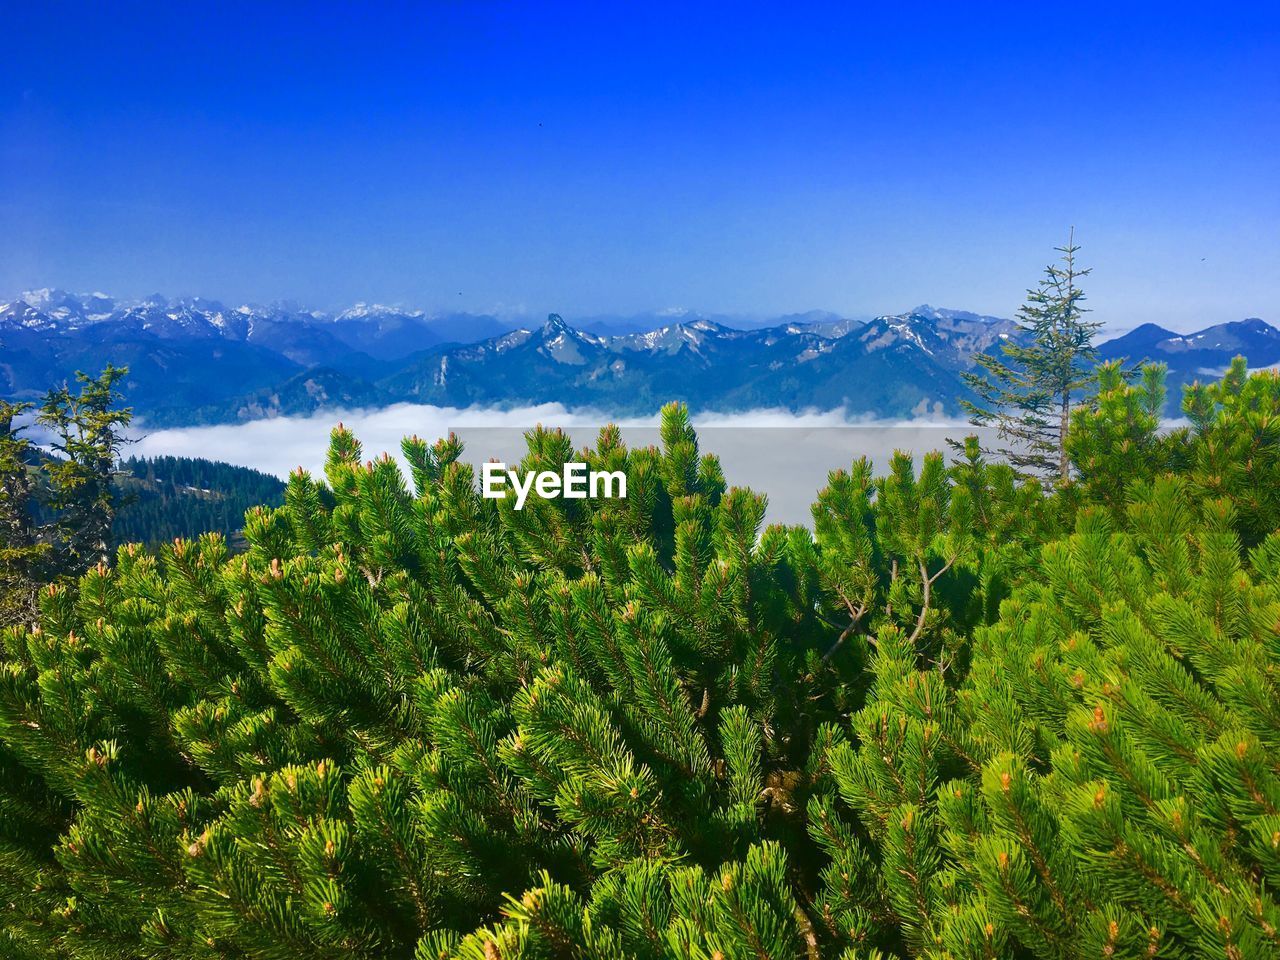 Scenic view of pine trees against blue sky